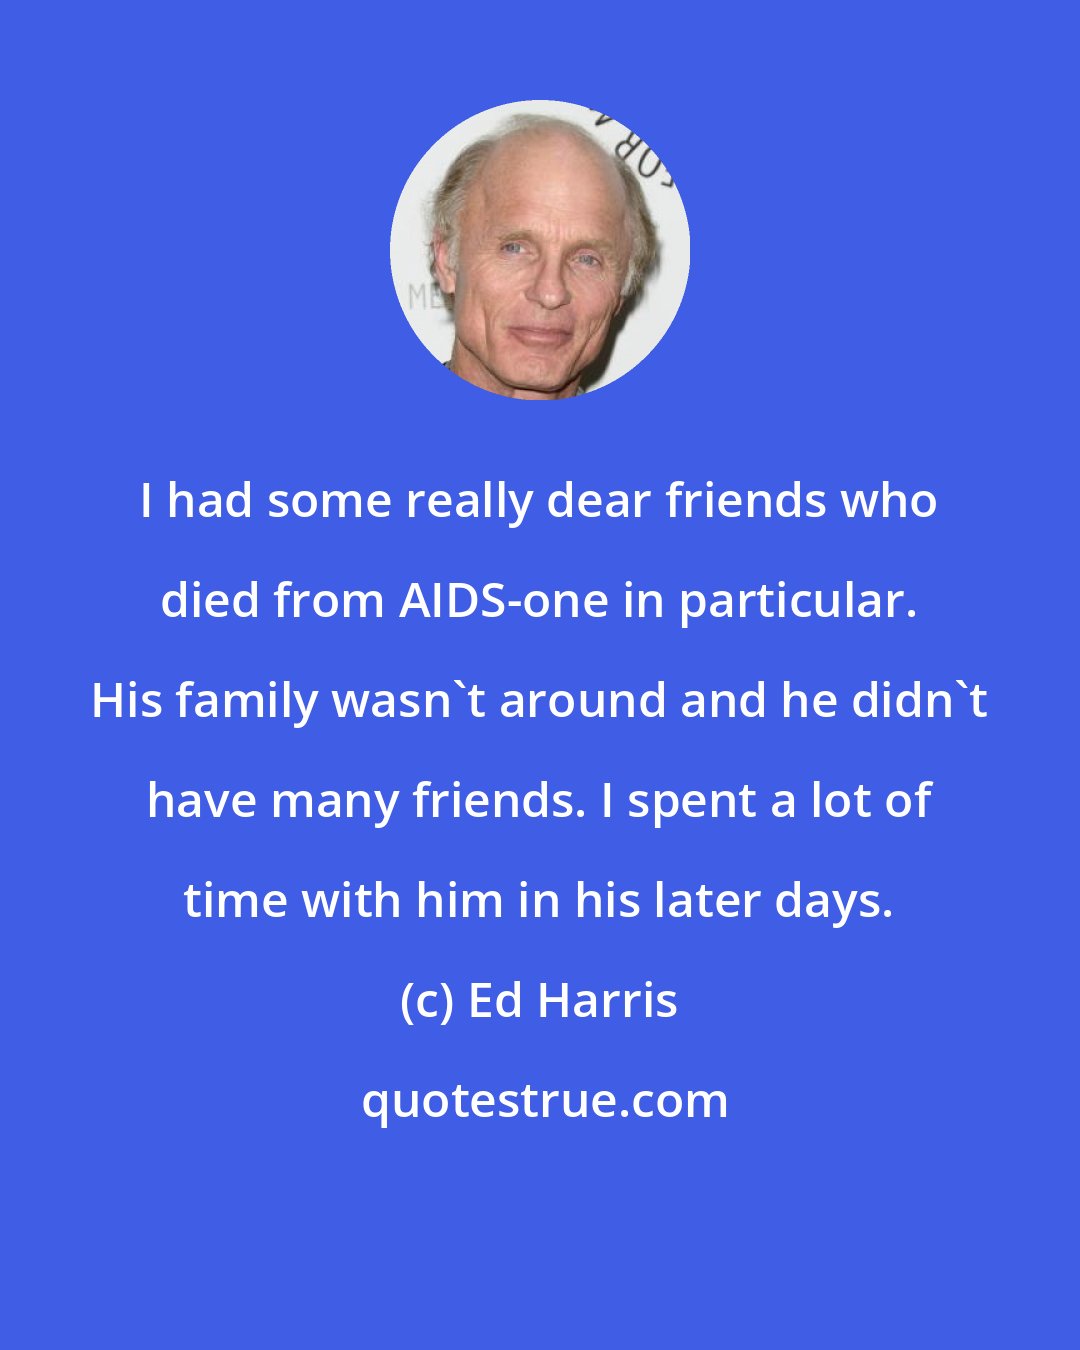 Ed Harris: I had some really dear friends who died from AIDS-one in particular. His family wasn't around and he didn't have many friends. I spent a lot of time with him in his later days.